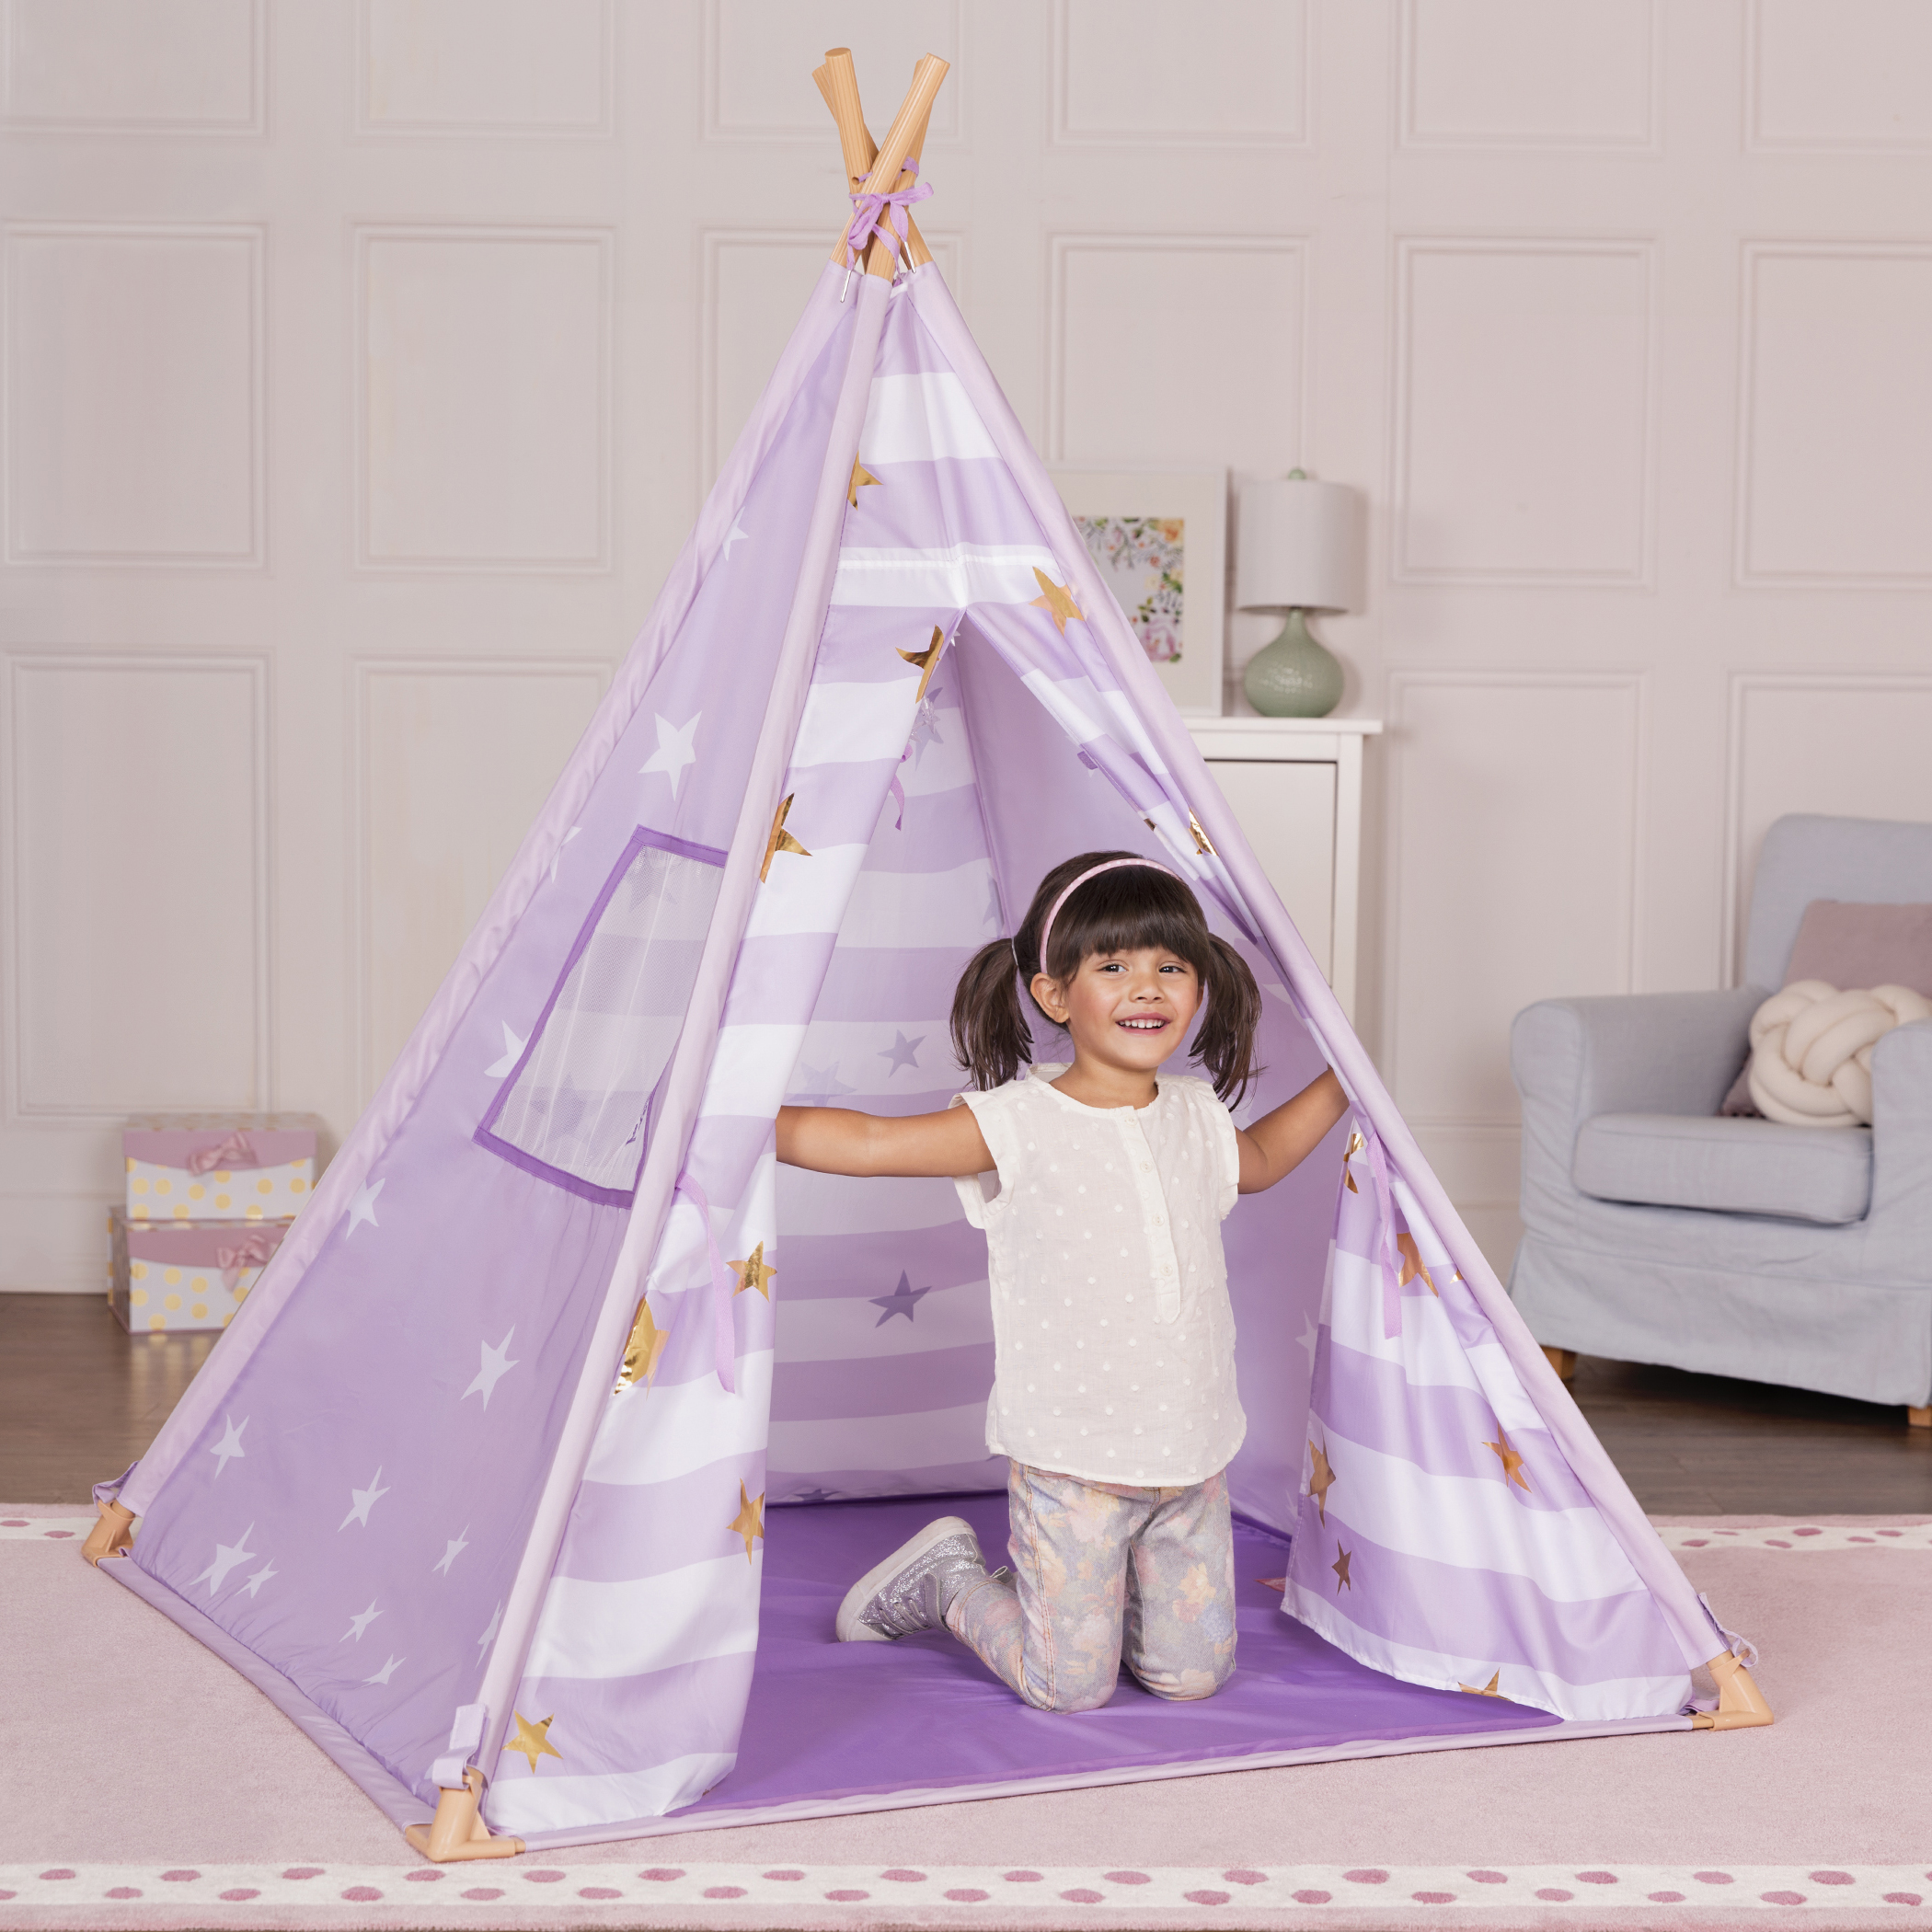 Lilac Suite Teepee little girl playing inside